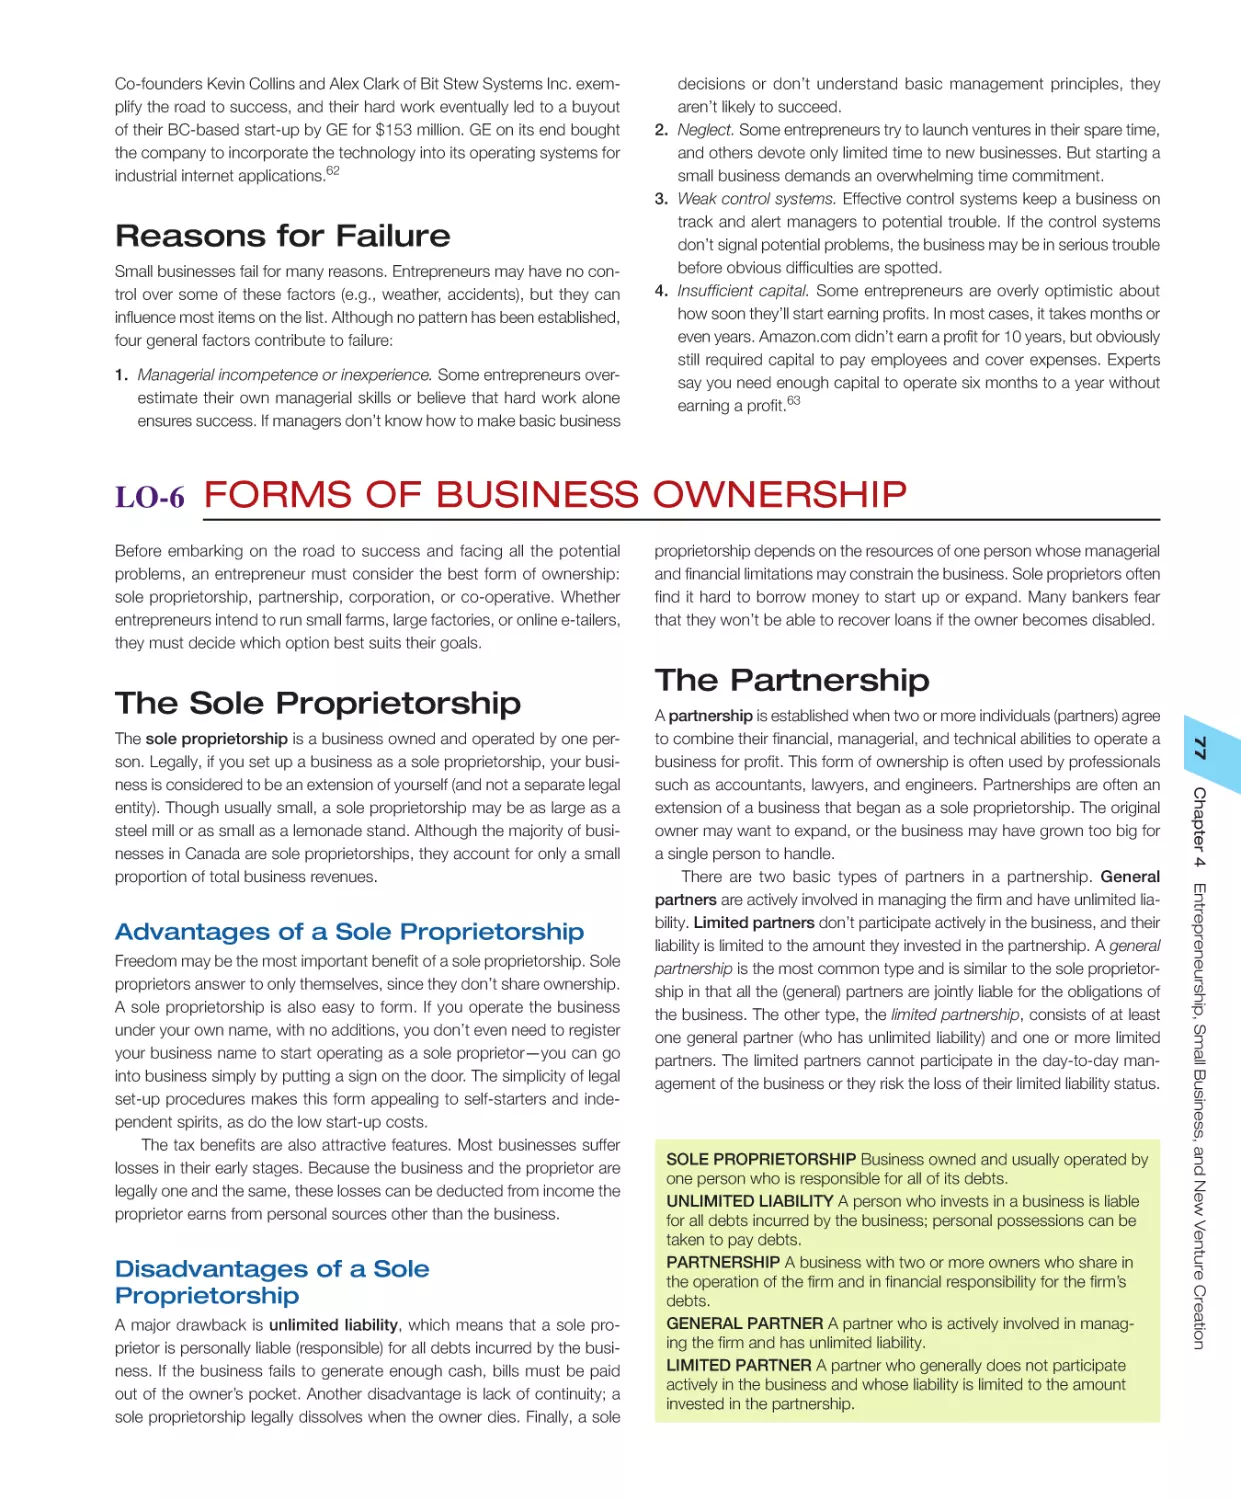 Reasons for Failure
LO‐6 Forms of Business Ownership
The Partnership